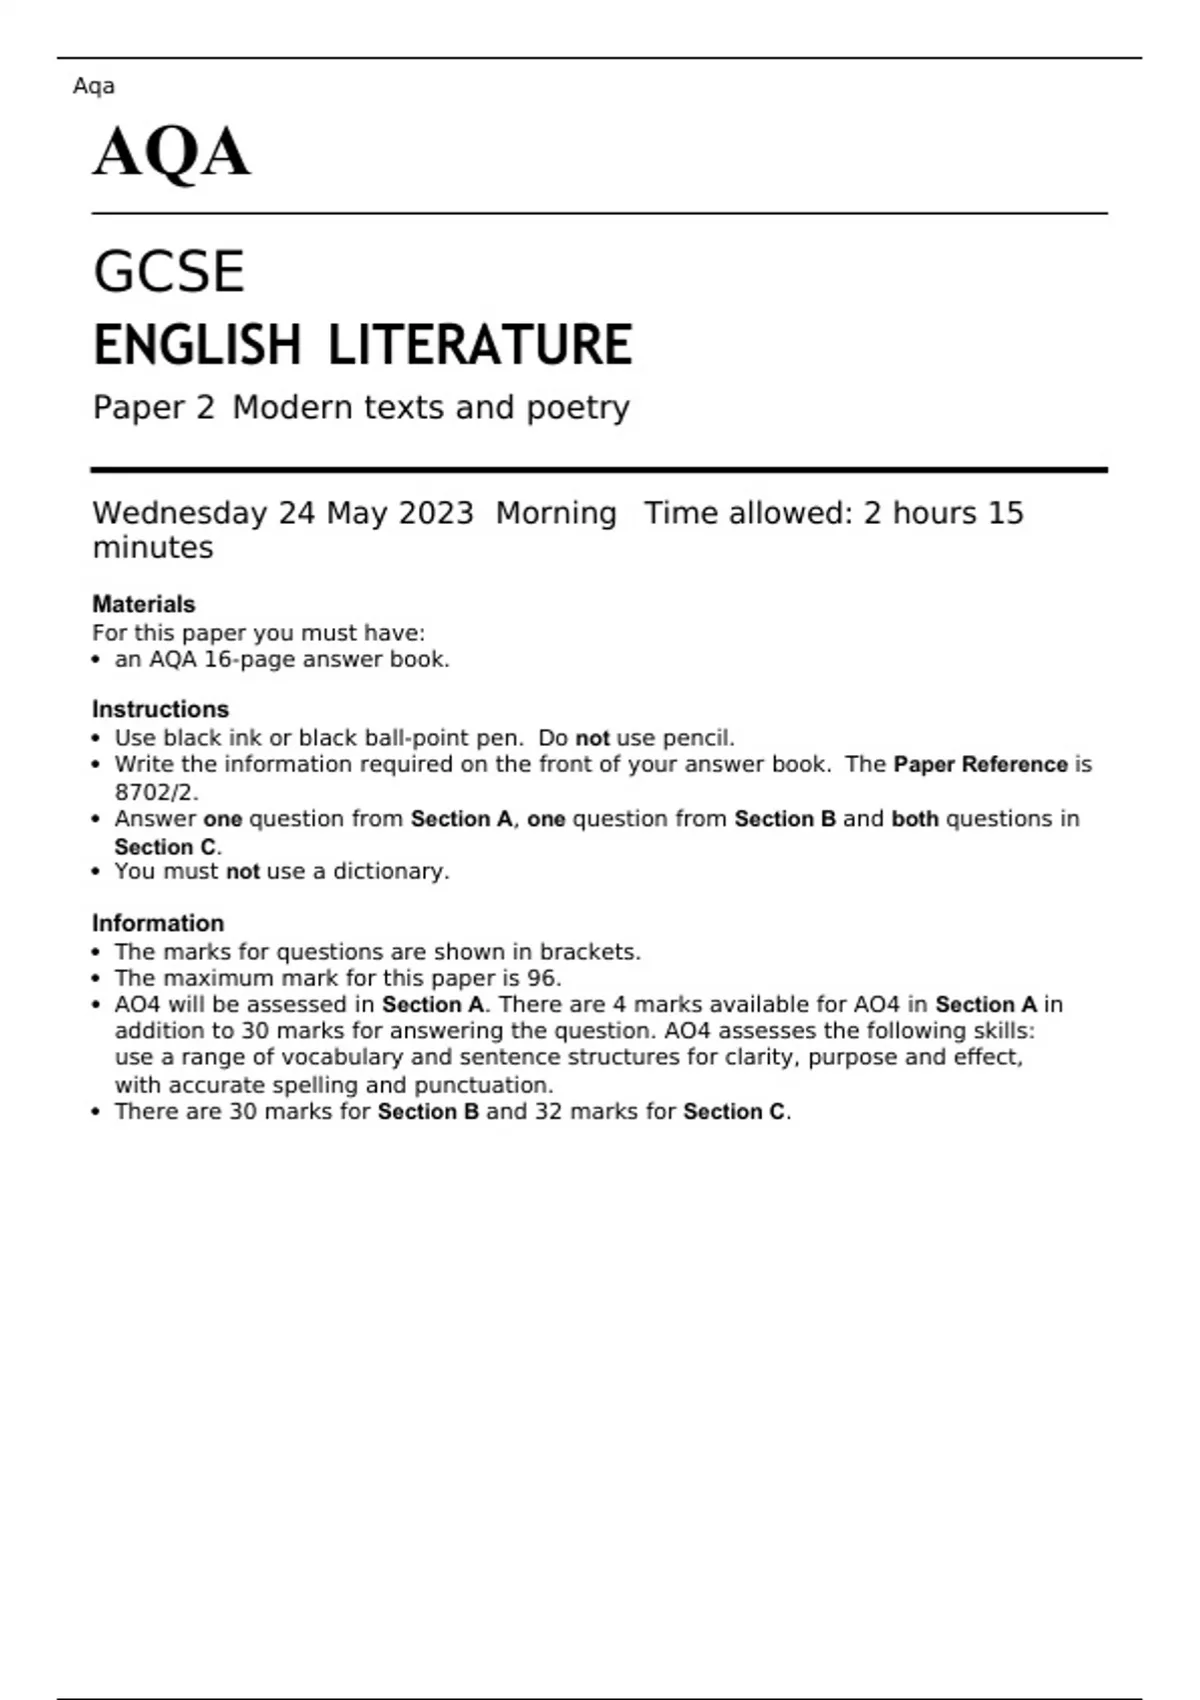 AQA GCSE ENGLISH LITERATURE Paper 1 and 2 JUNE 2023 QUESTION PAPERS AND ...